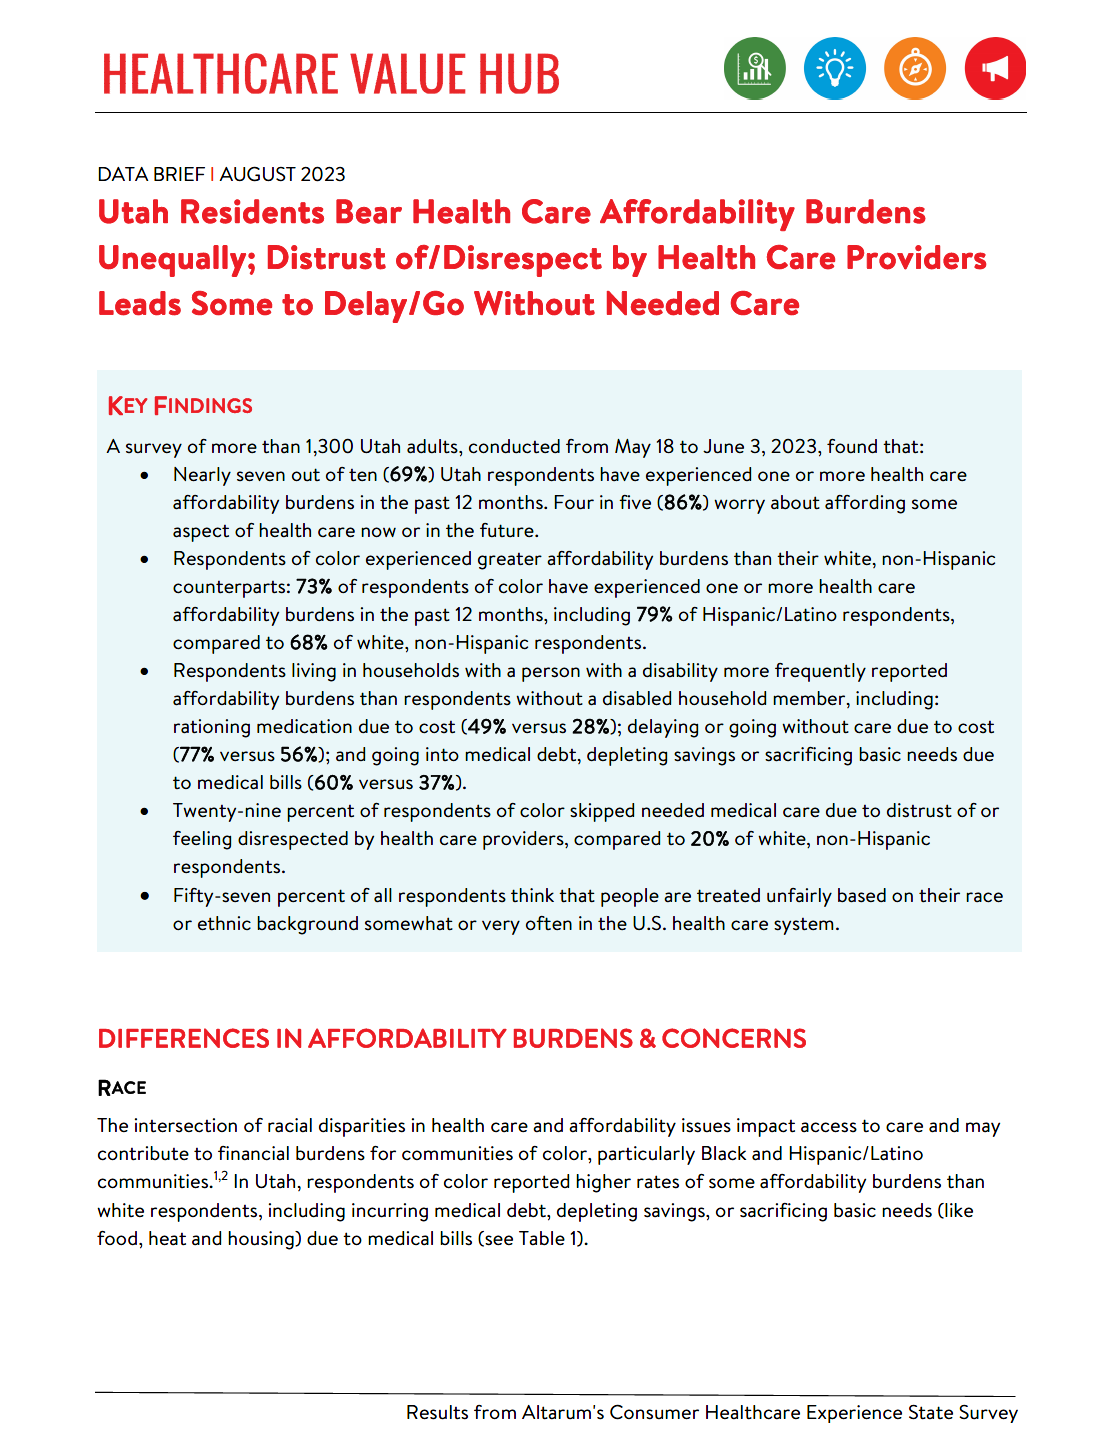 Utah Residents Bear Health Care Affordability Burdens Unequally_Cover.png